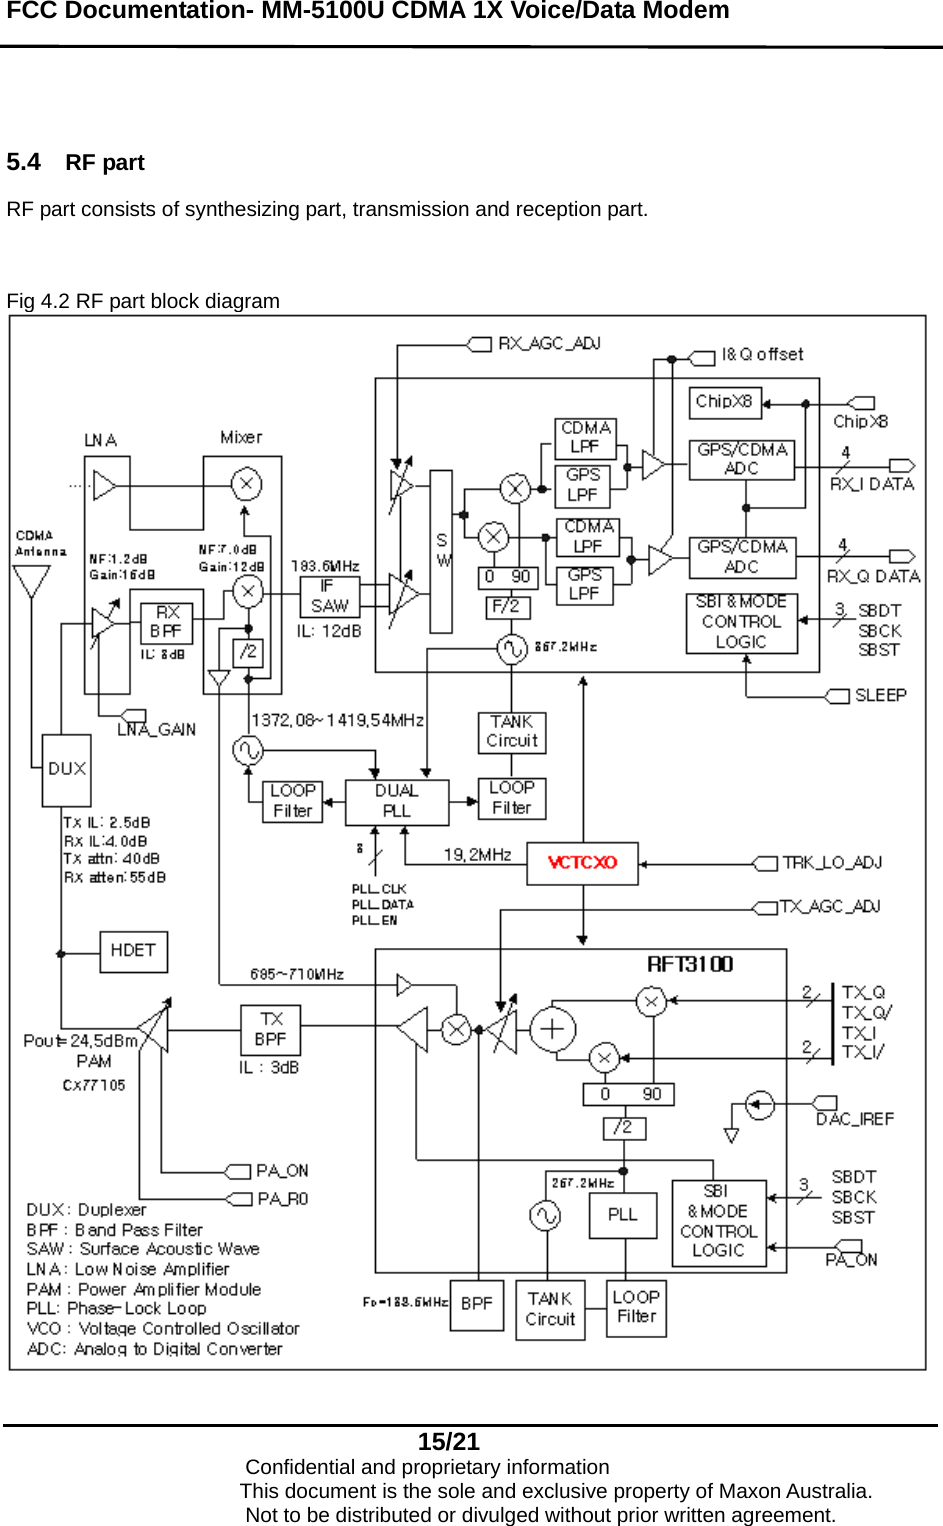 FCC Documentation- MM-5100U CDMA 1X Voice/Data Modem    5.4  RF part   RF part consists of synthesizing part, transmission and reception part.  Fig 4.2 RF part block diagram   15/21                            Confidential and proprietary information                       This document is the sole and exclusive property of Maxon Australia.                           Not to be distributed or divulged without prior written agreement. 